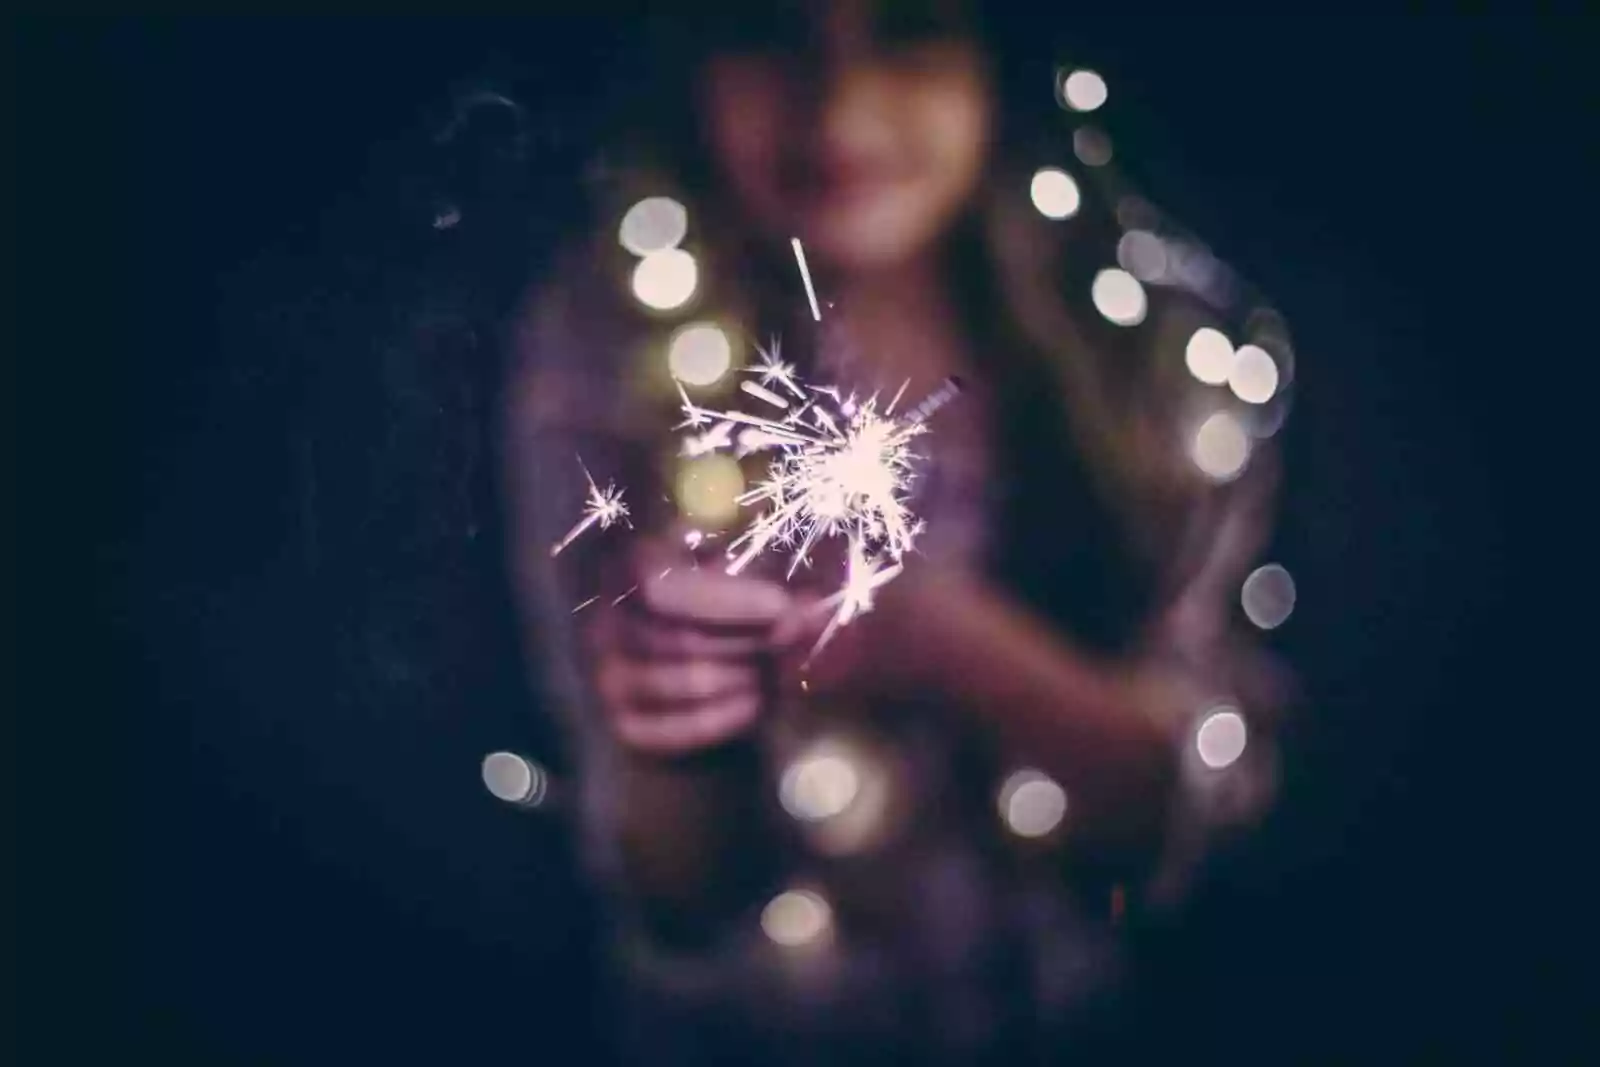 Finding hope o n dark days with mental illness. Woman holding a sparkler on a dark night.